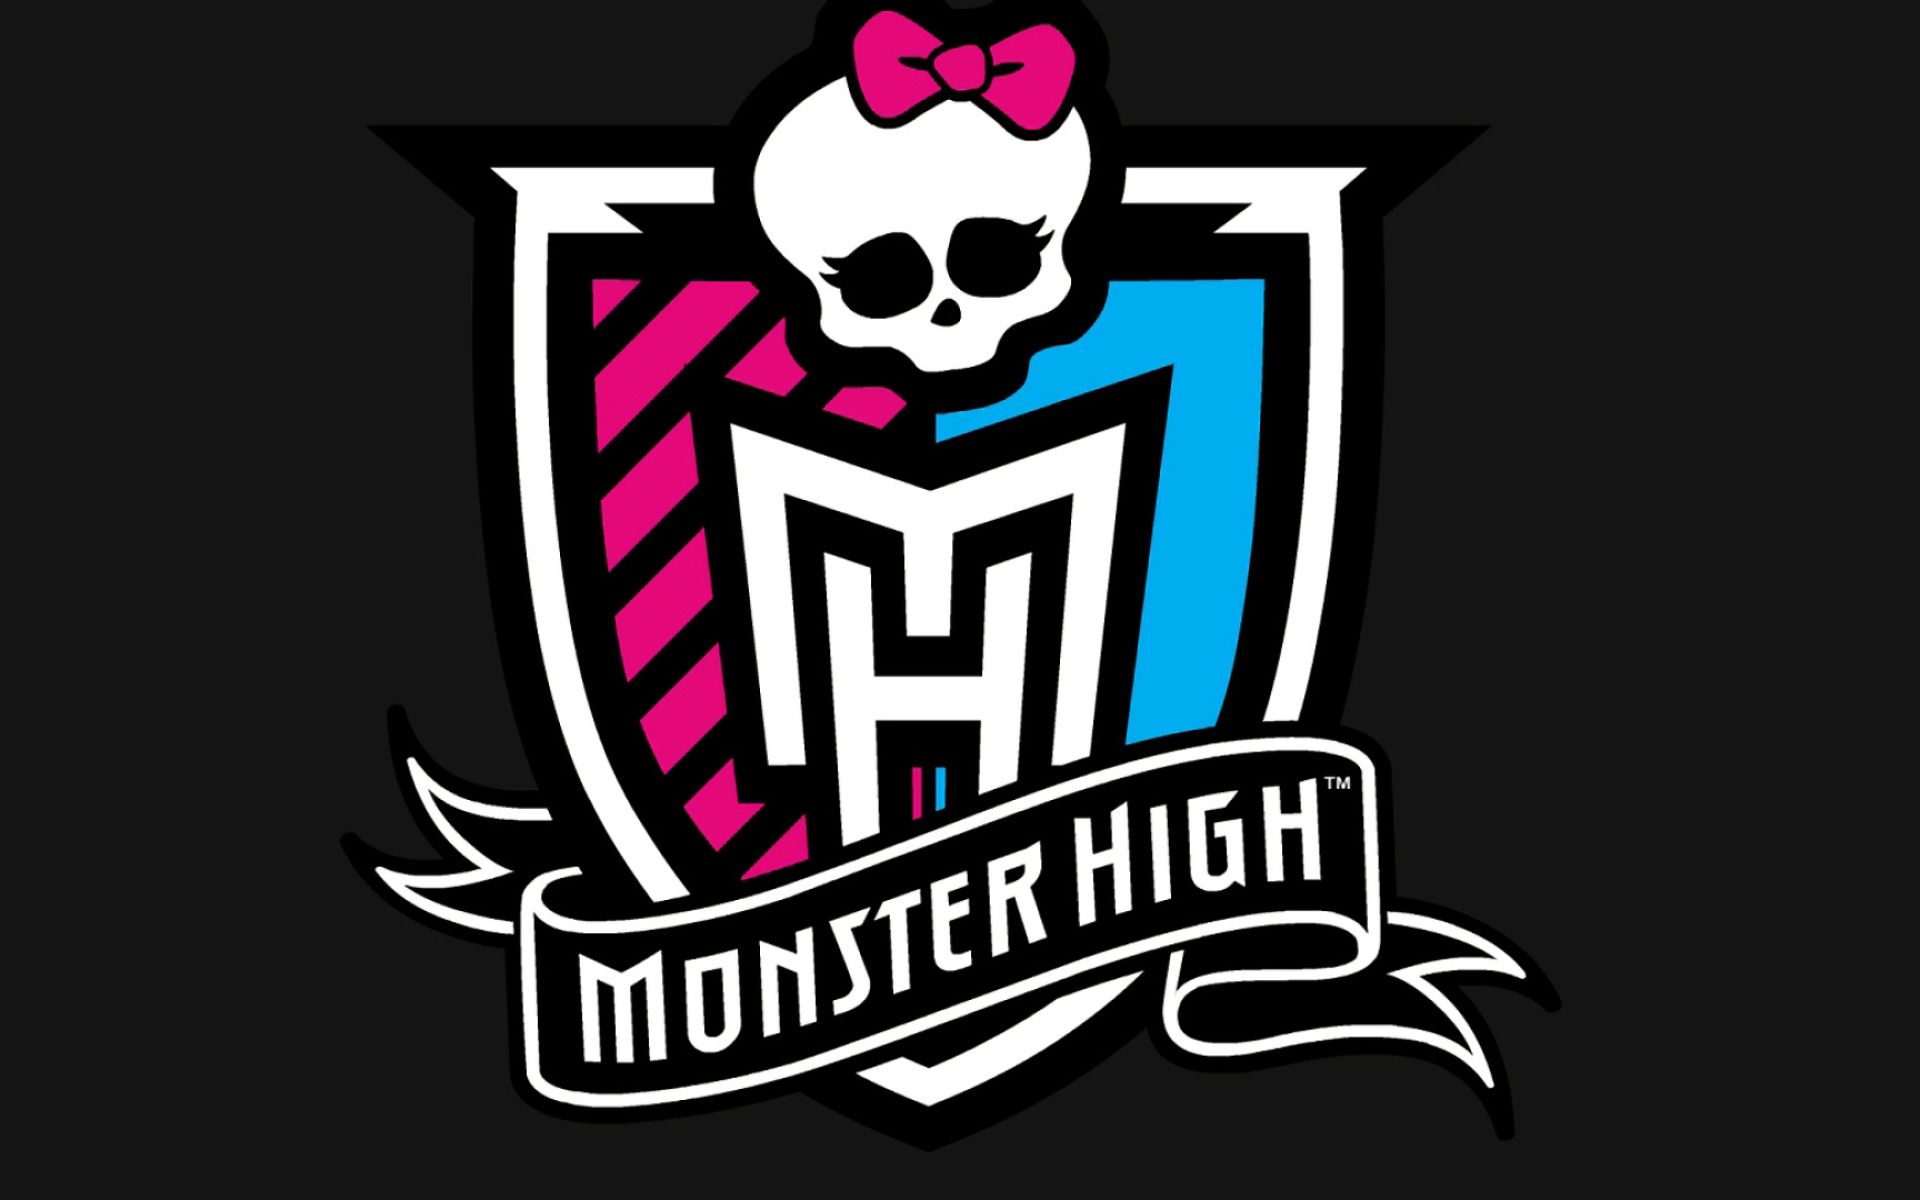 Monster High: Mattel's franchise, The sons and daughters of monsters. 1920x1200 HD Wallpaper.